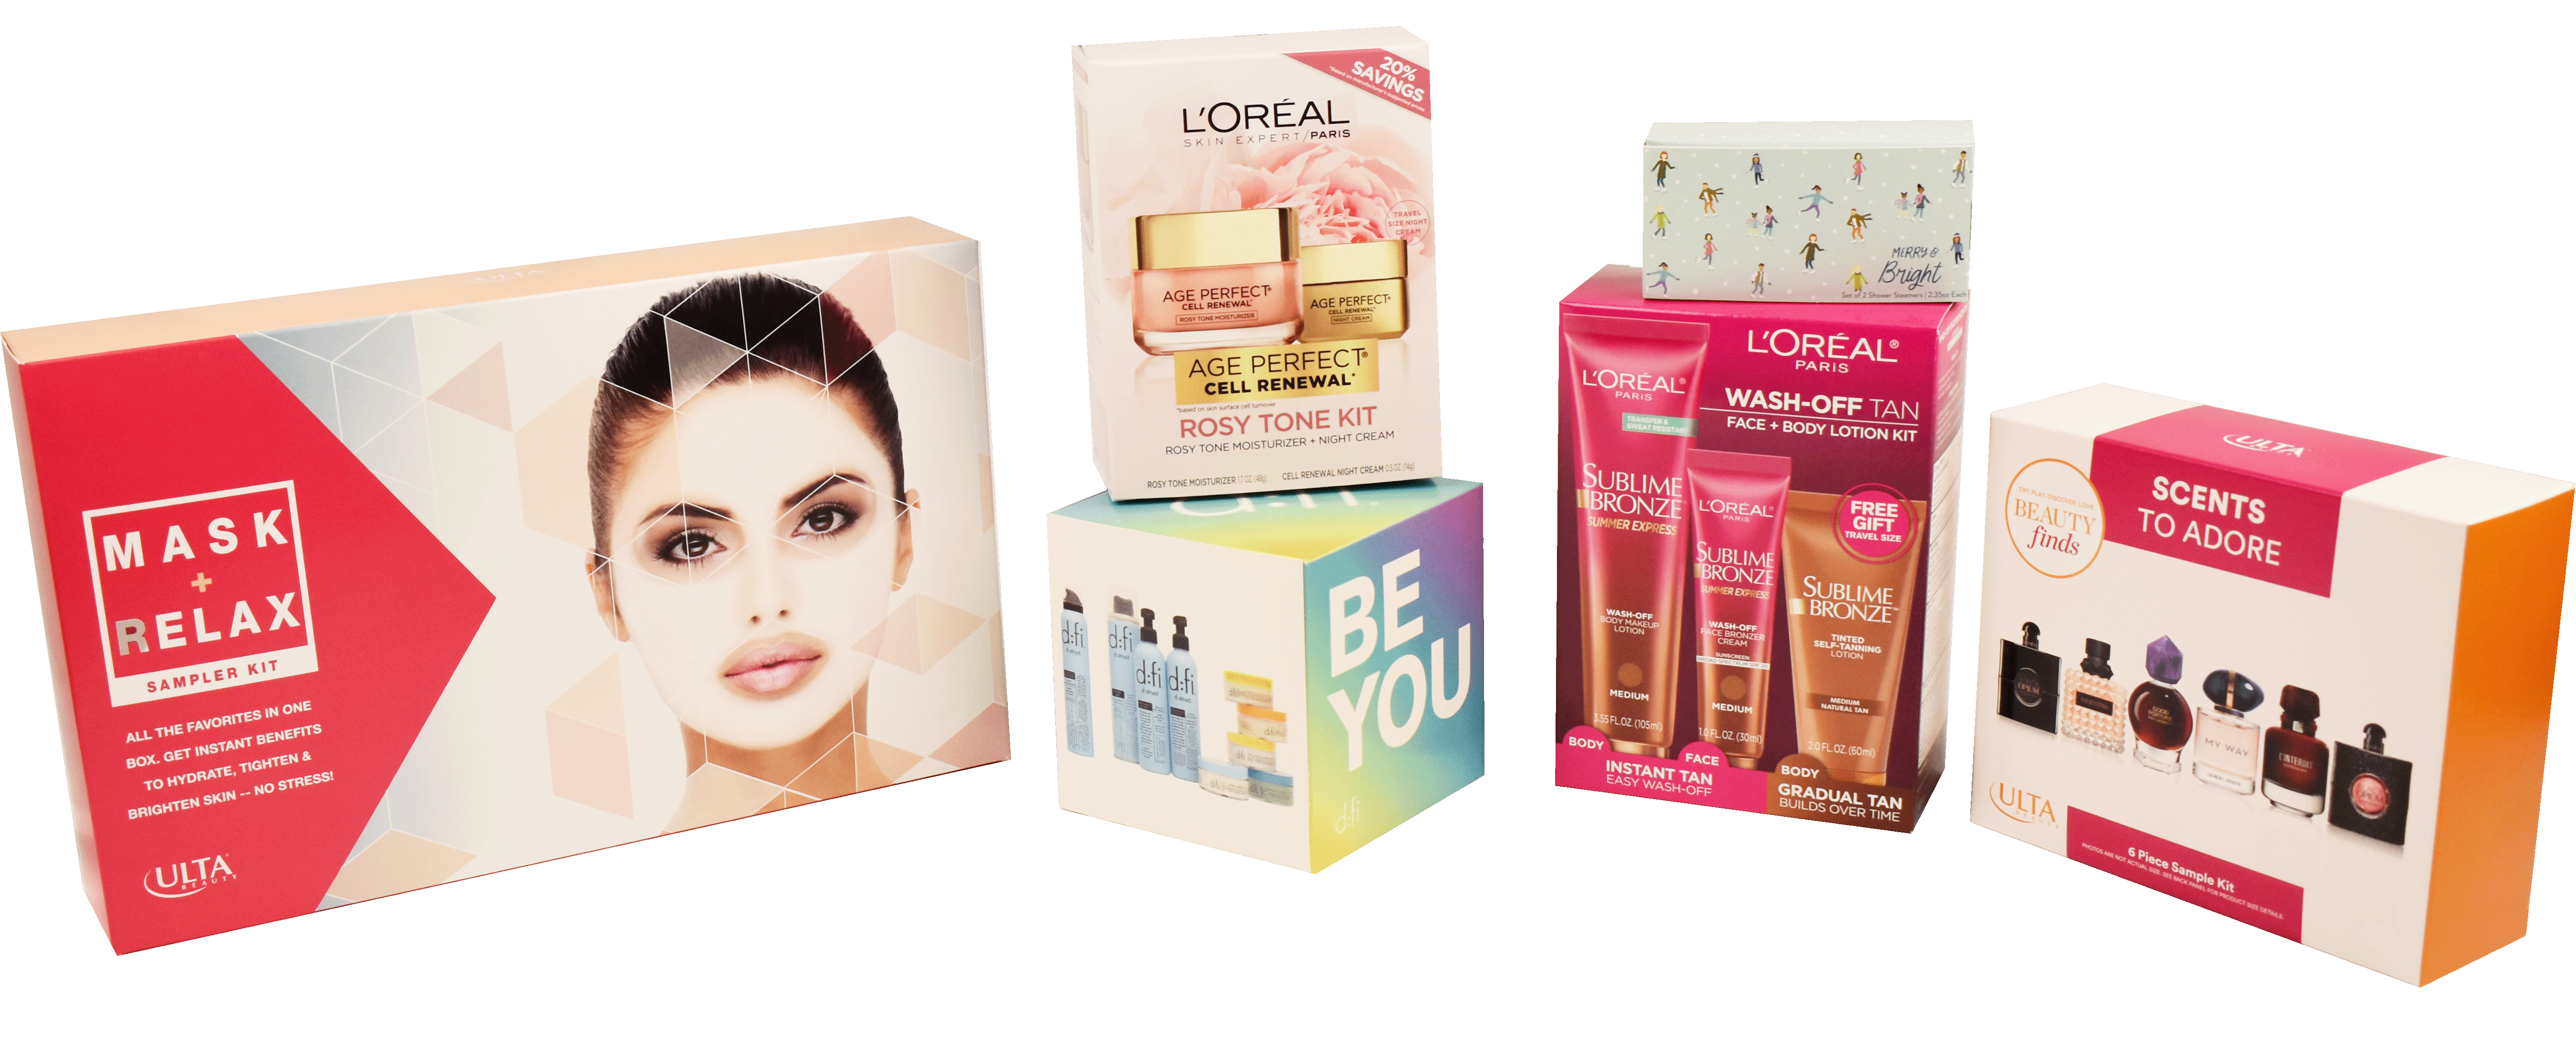 This image shows a collection of skincare and beauty product kits from various brands, including face masks, moisturizers, and self-tanning lotions, with colorful packaging.